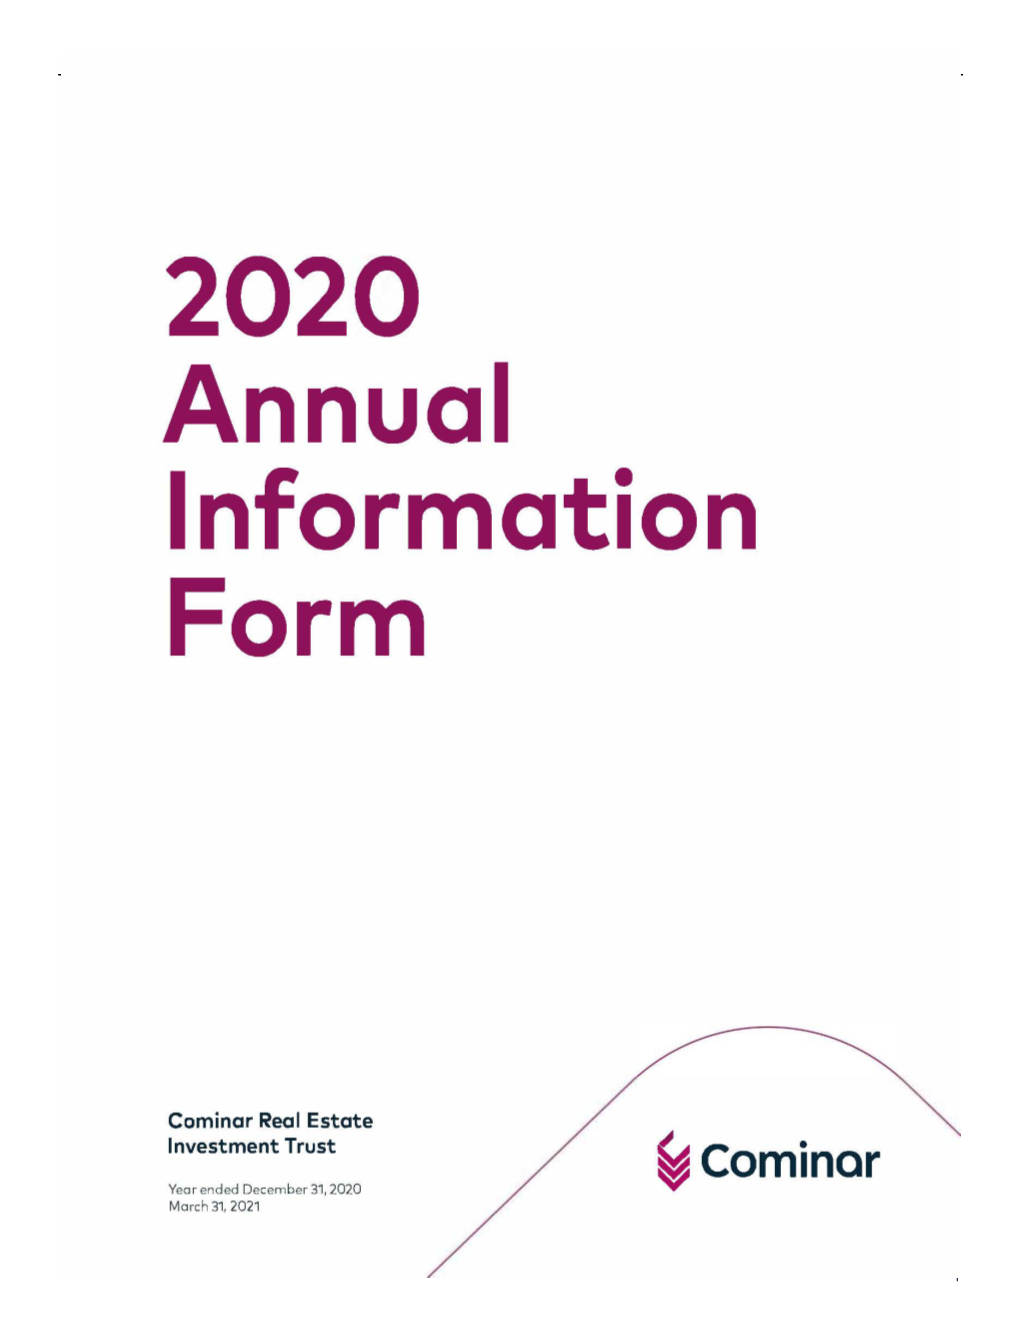 Cominar Real Estate Investment Trust 2020 Annual Information Form 1